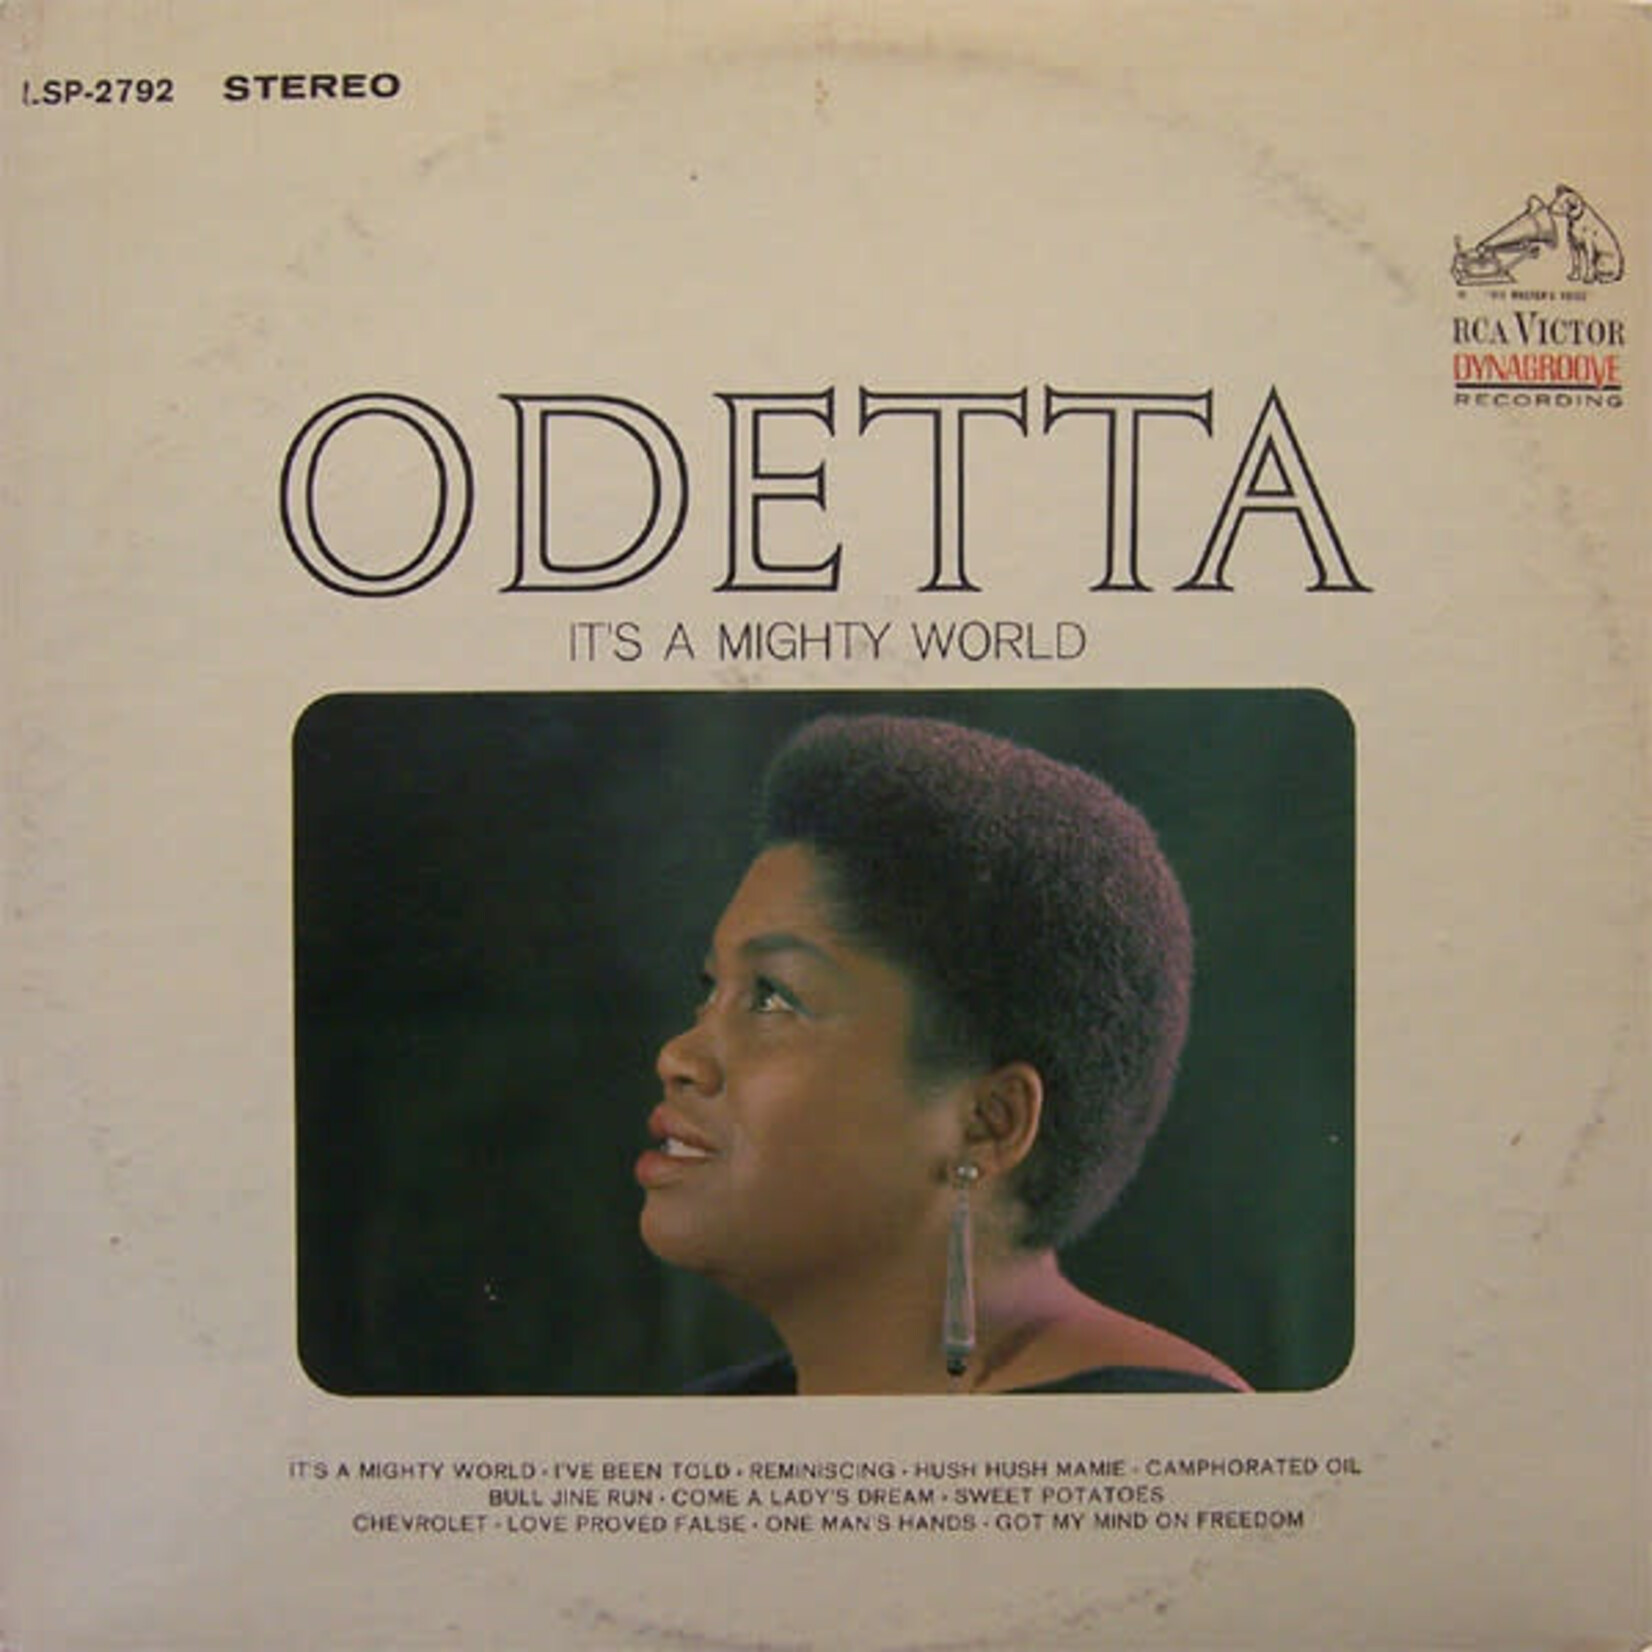 Odetta – It's A Mighty World (VG, 1964, LP, RCA Victor – LSP-2792)